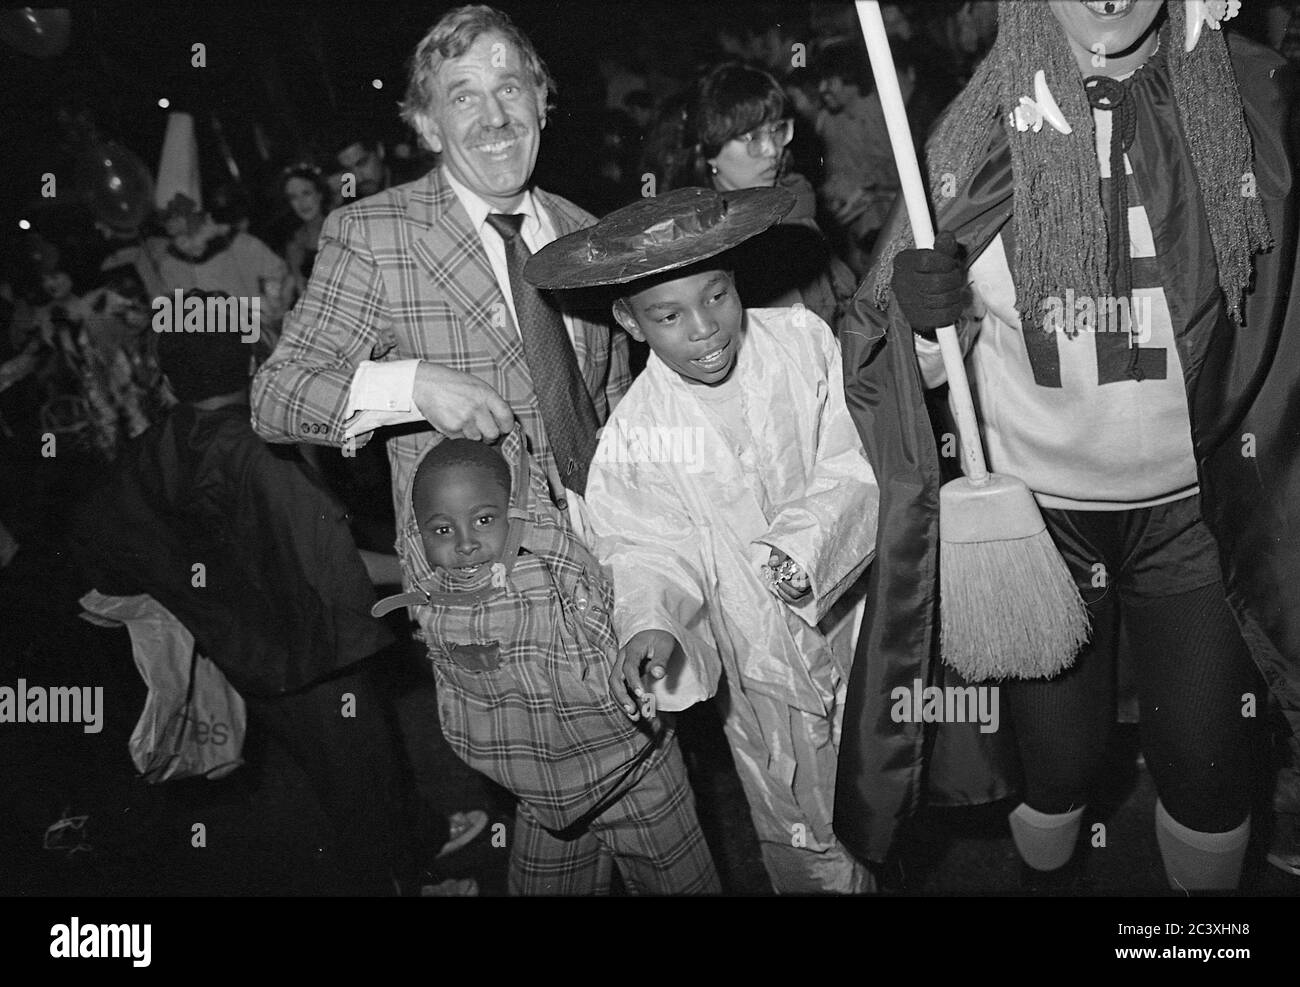 Family at the Greenwich Village Halloween Parade, New York City, USA in the 1980's  Photographed with Black & White film at night. Stock Photo